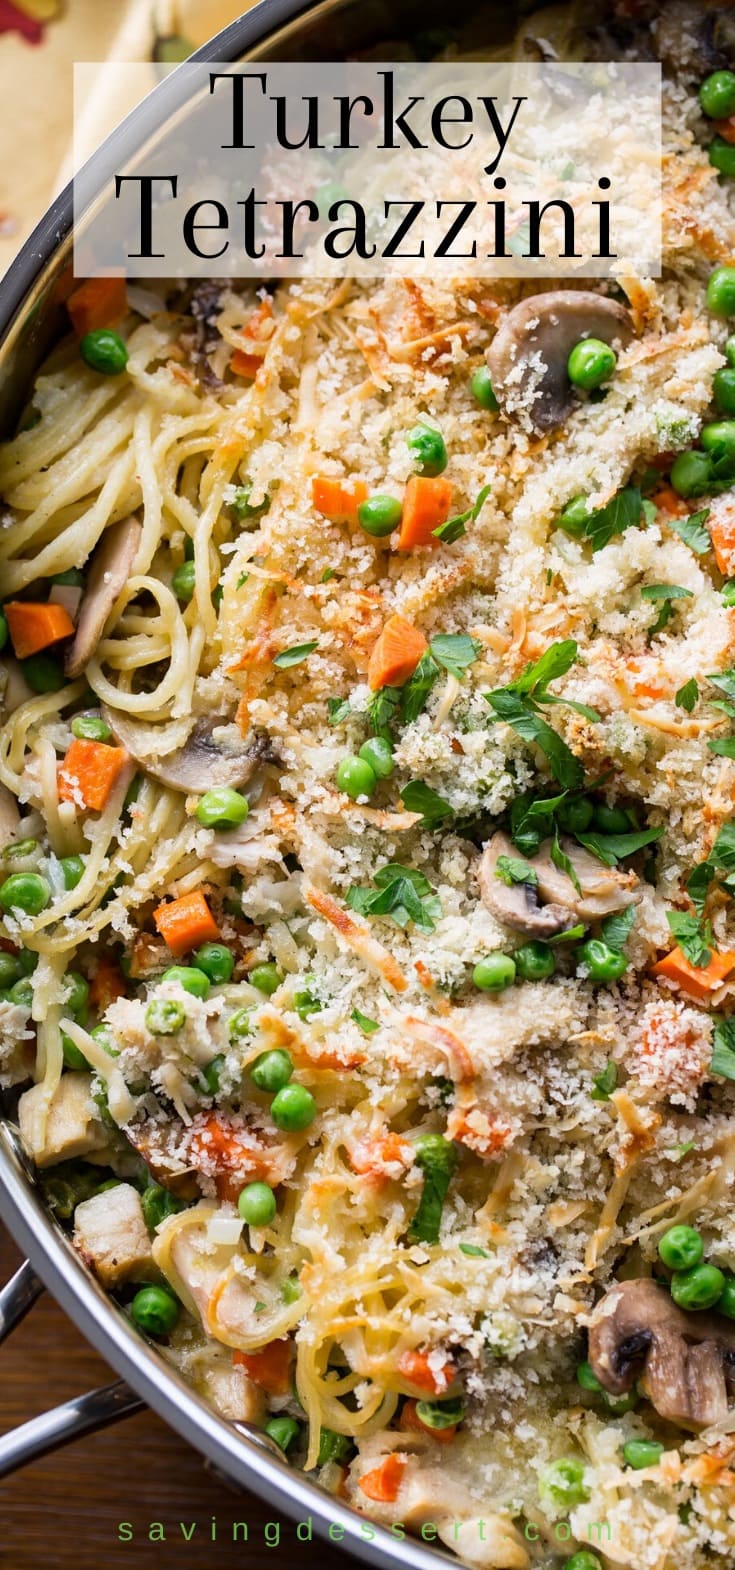 A skillet filled with Turkey Tetrazzini with peas, carrots, spaghetti noodles and mushrooms